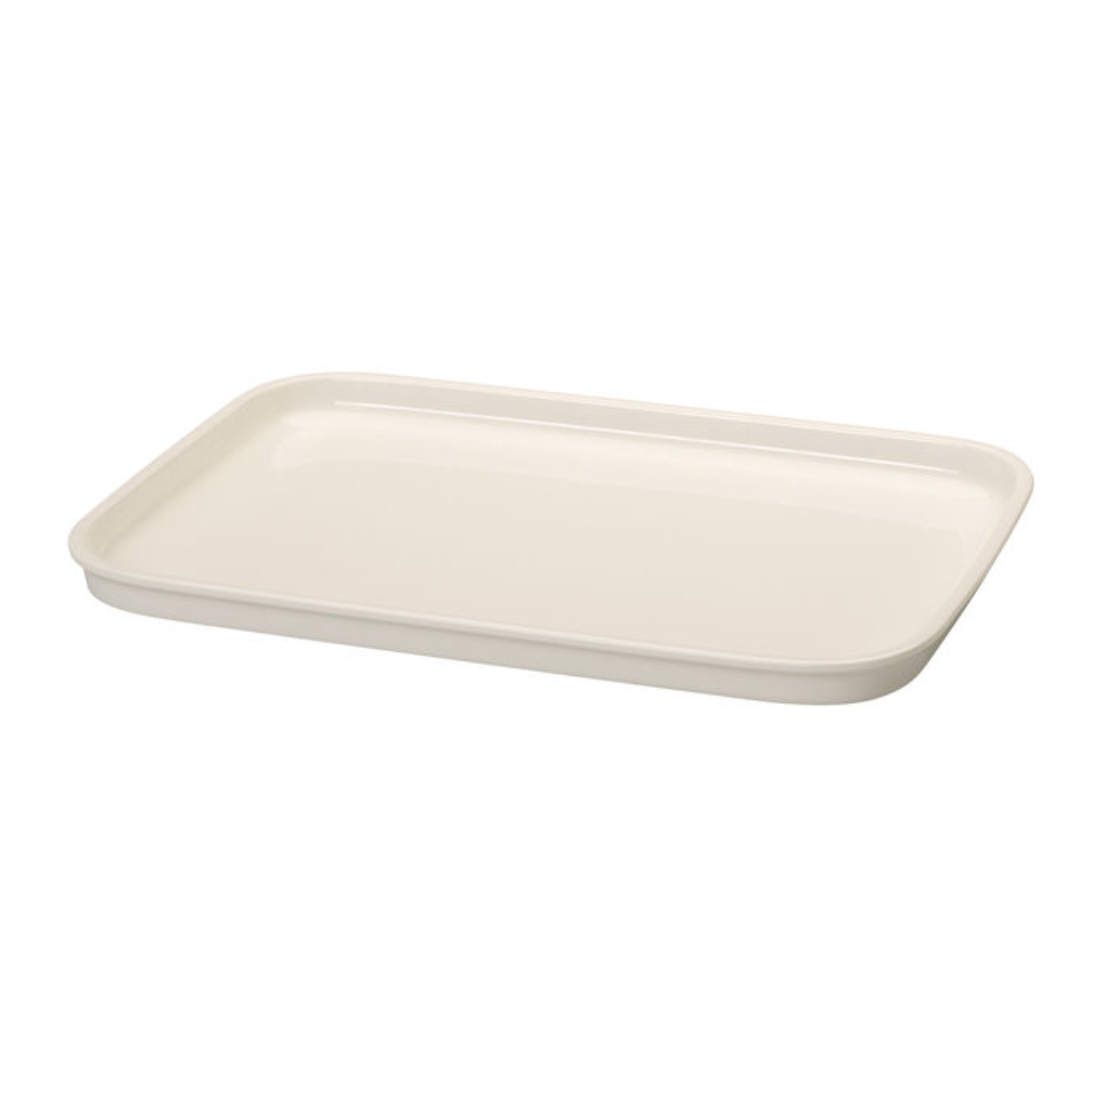 Villeroy-and-Boch-Clever-Cooking-Rectangle-Serving-Plate_200407_195127